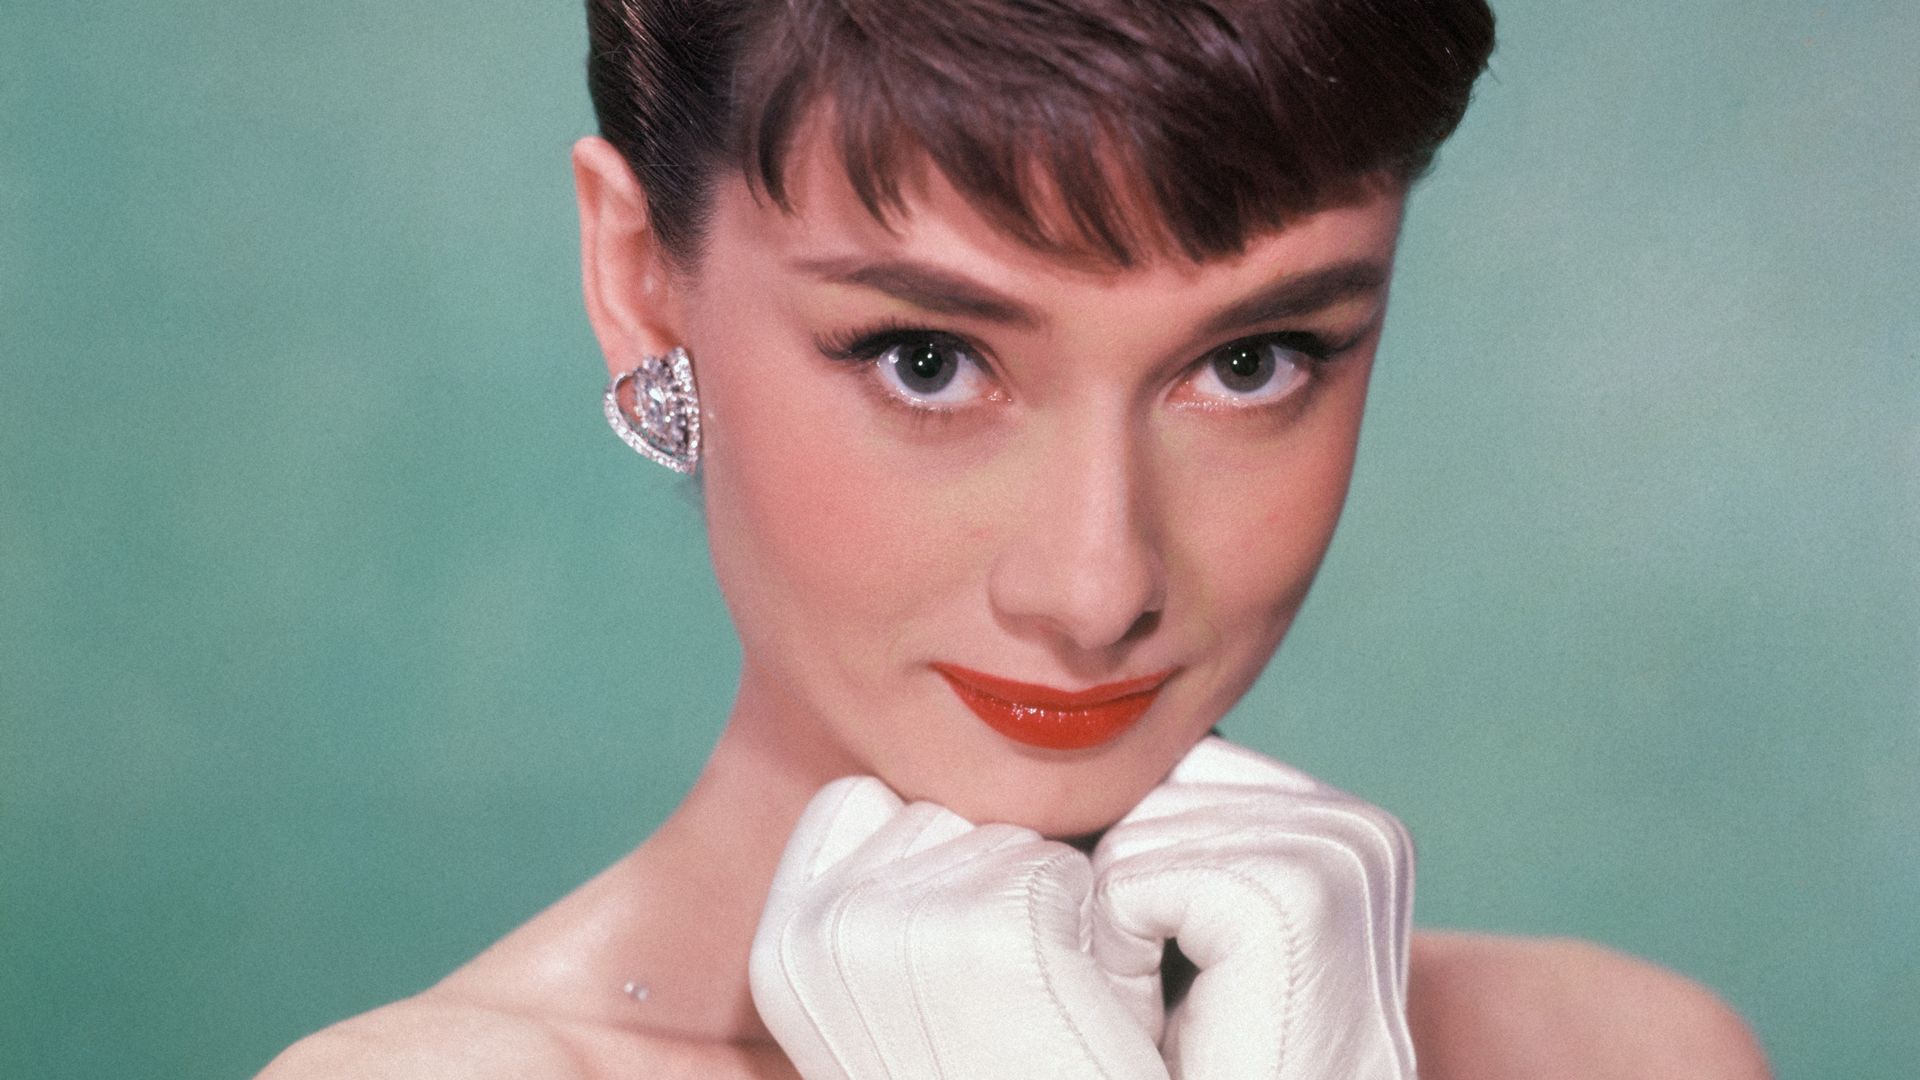 6 Facts You May Not Know About Audrey Hepburn